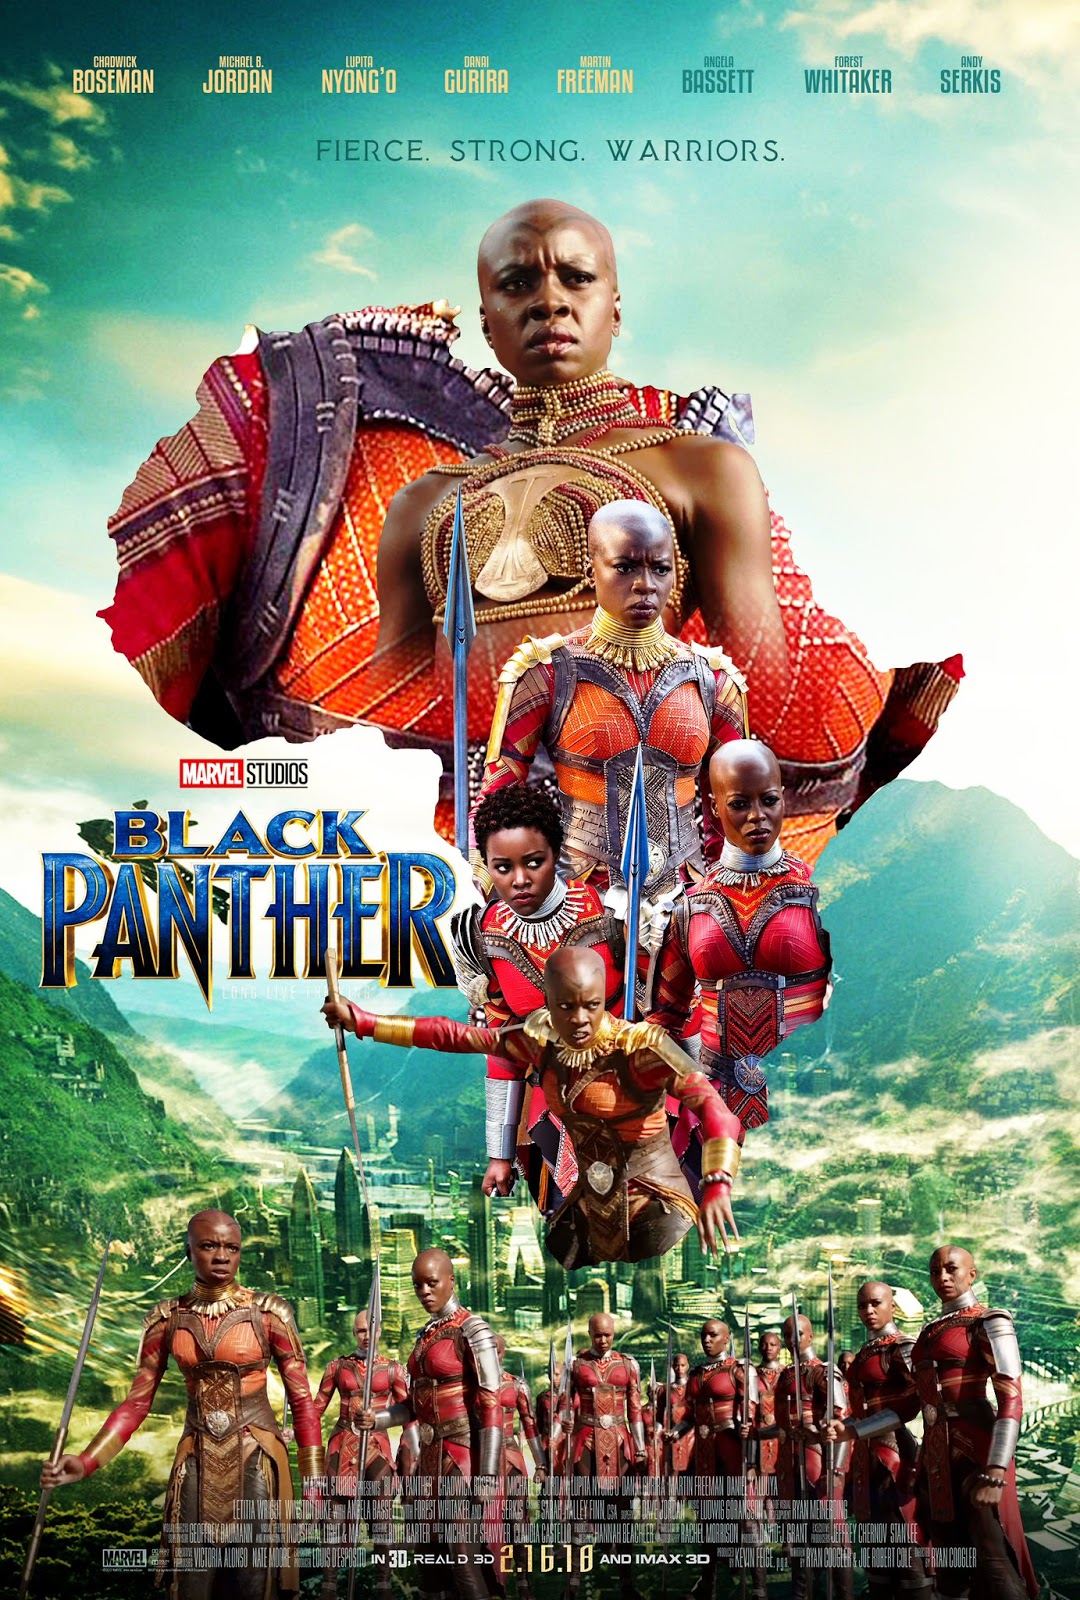 These "Black Panther" Fan Movie Posters Are Everything 